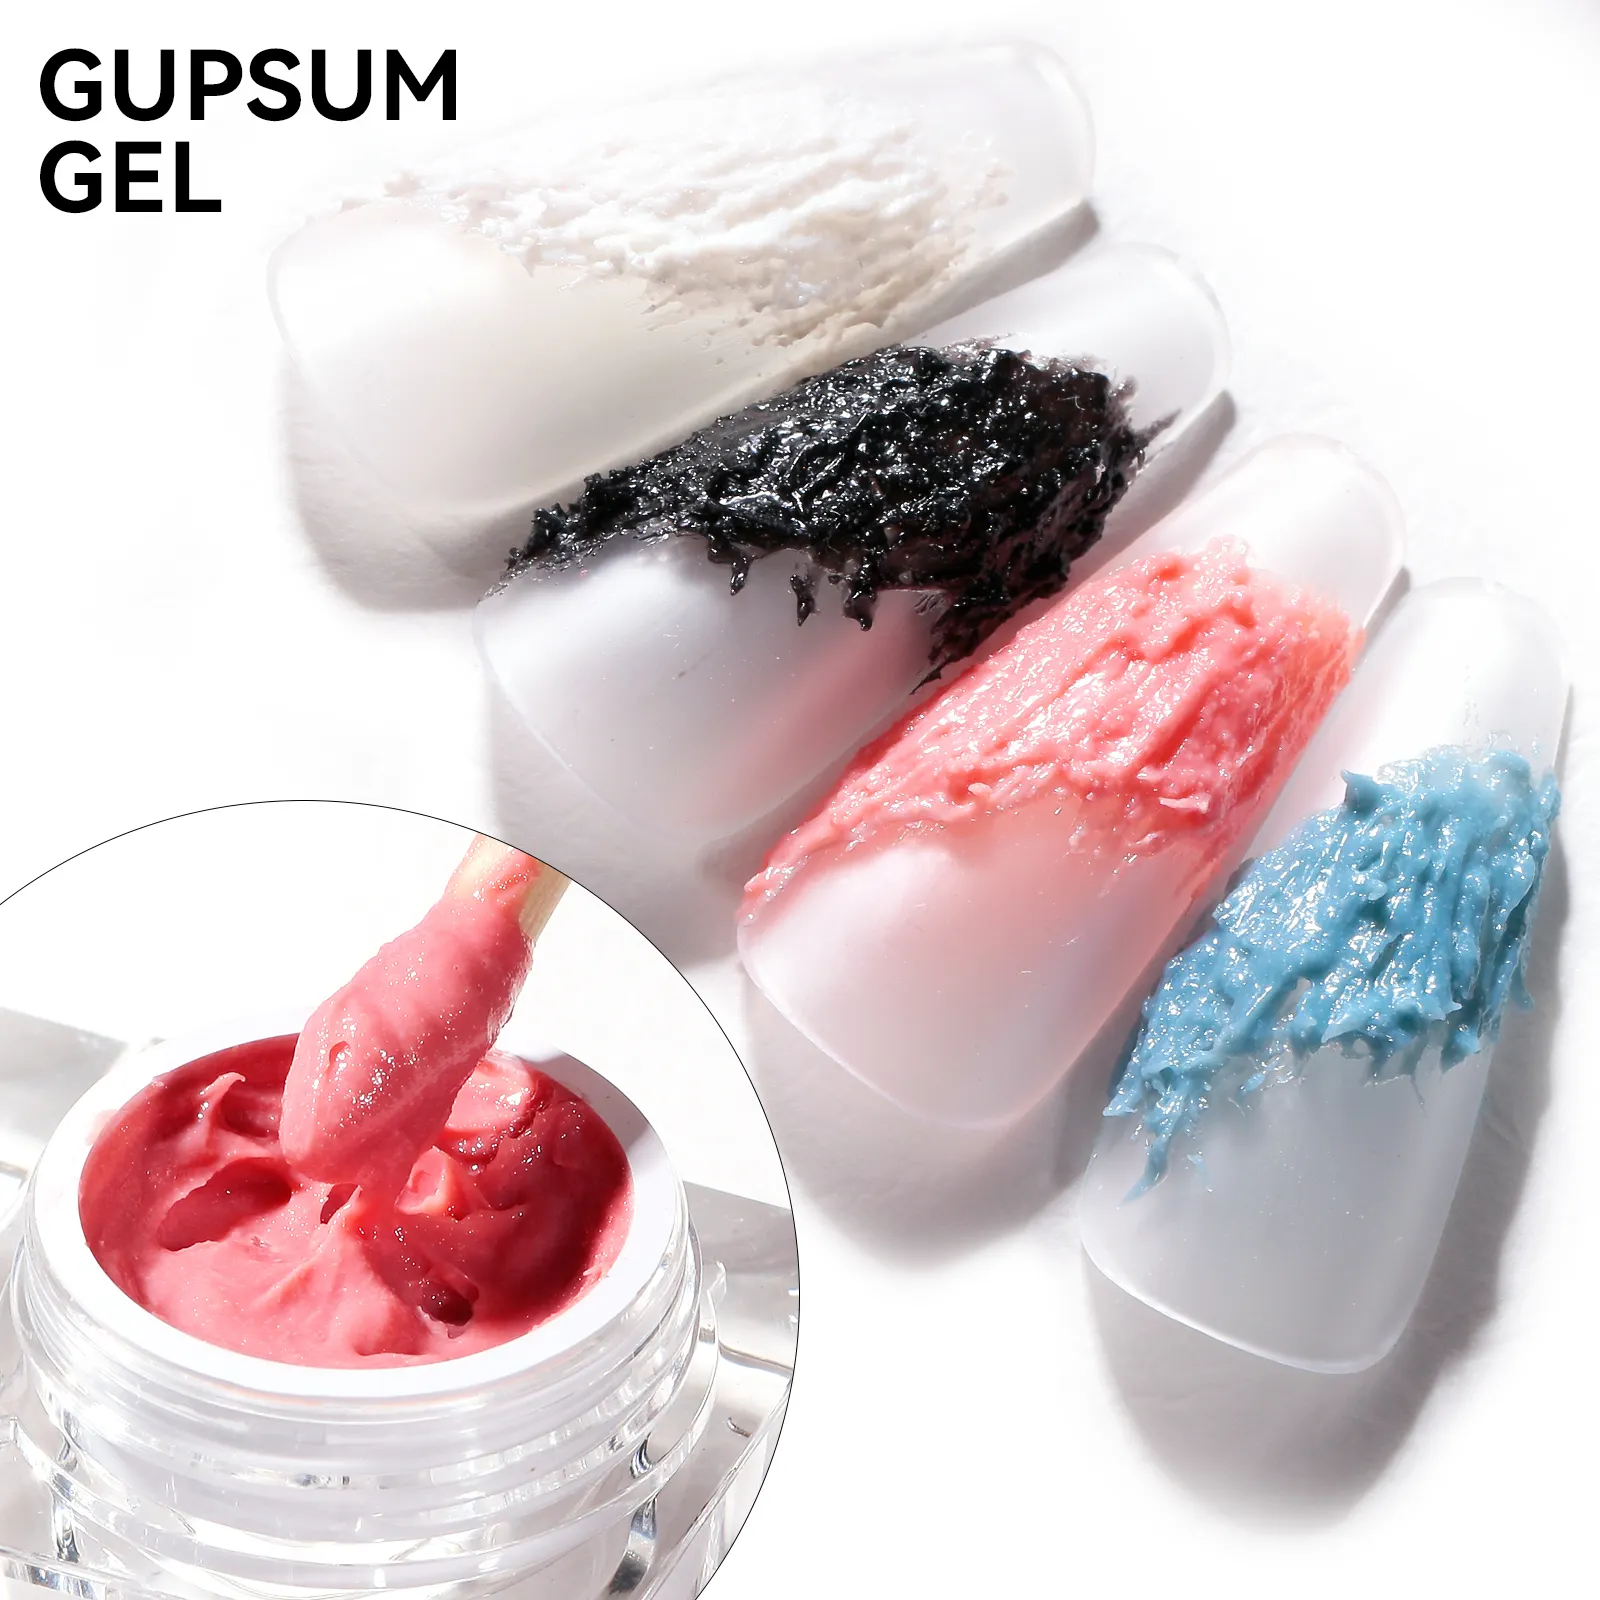 JTING 4colors collection 3d nail art gypsum gel polish OEM ODM creative effects gypsum gel nail polish private label